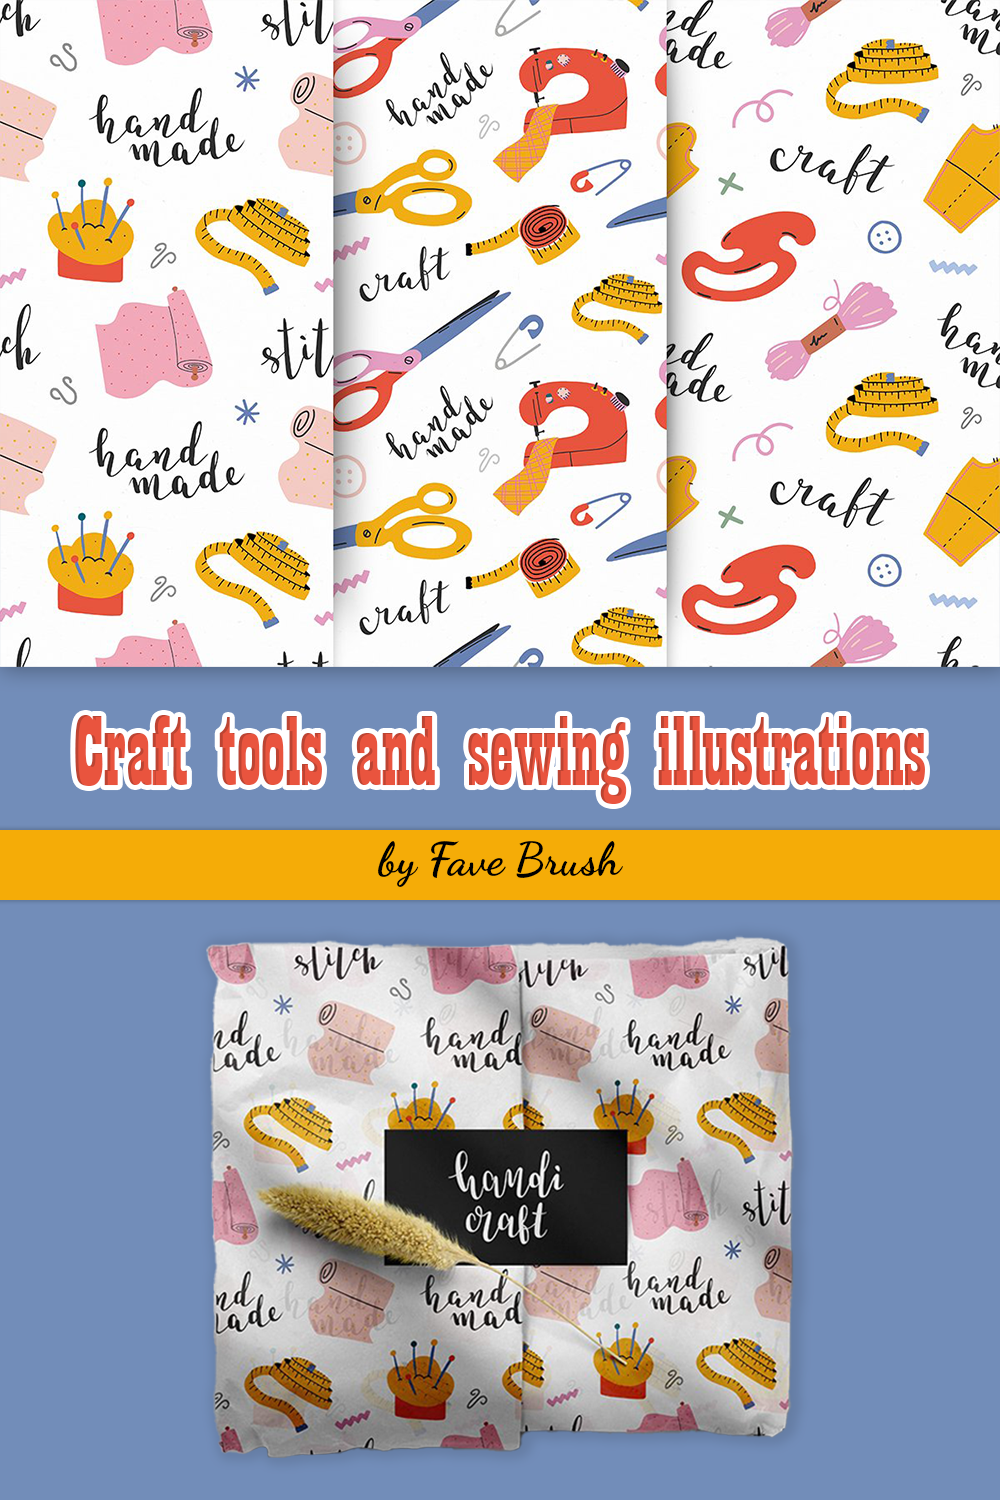 Craft tools and sewing illustrations of pinterest.